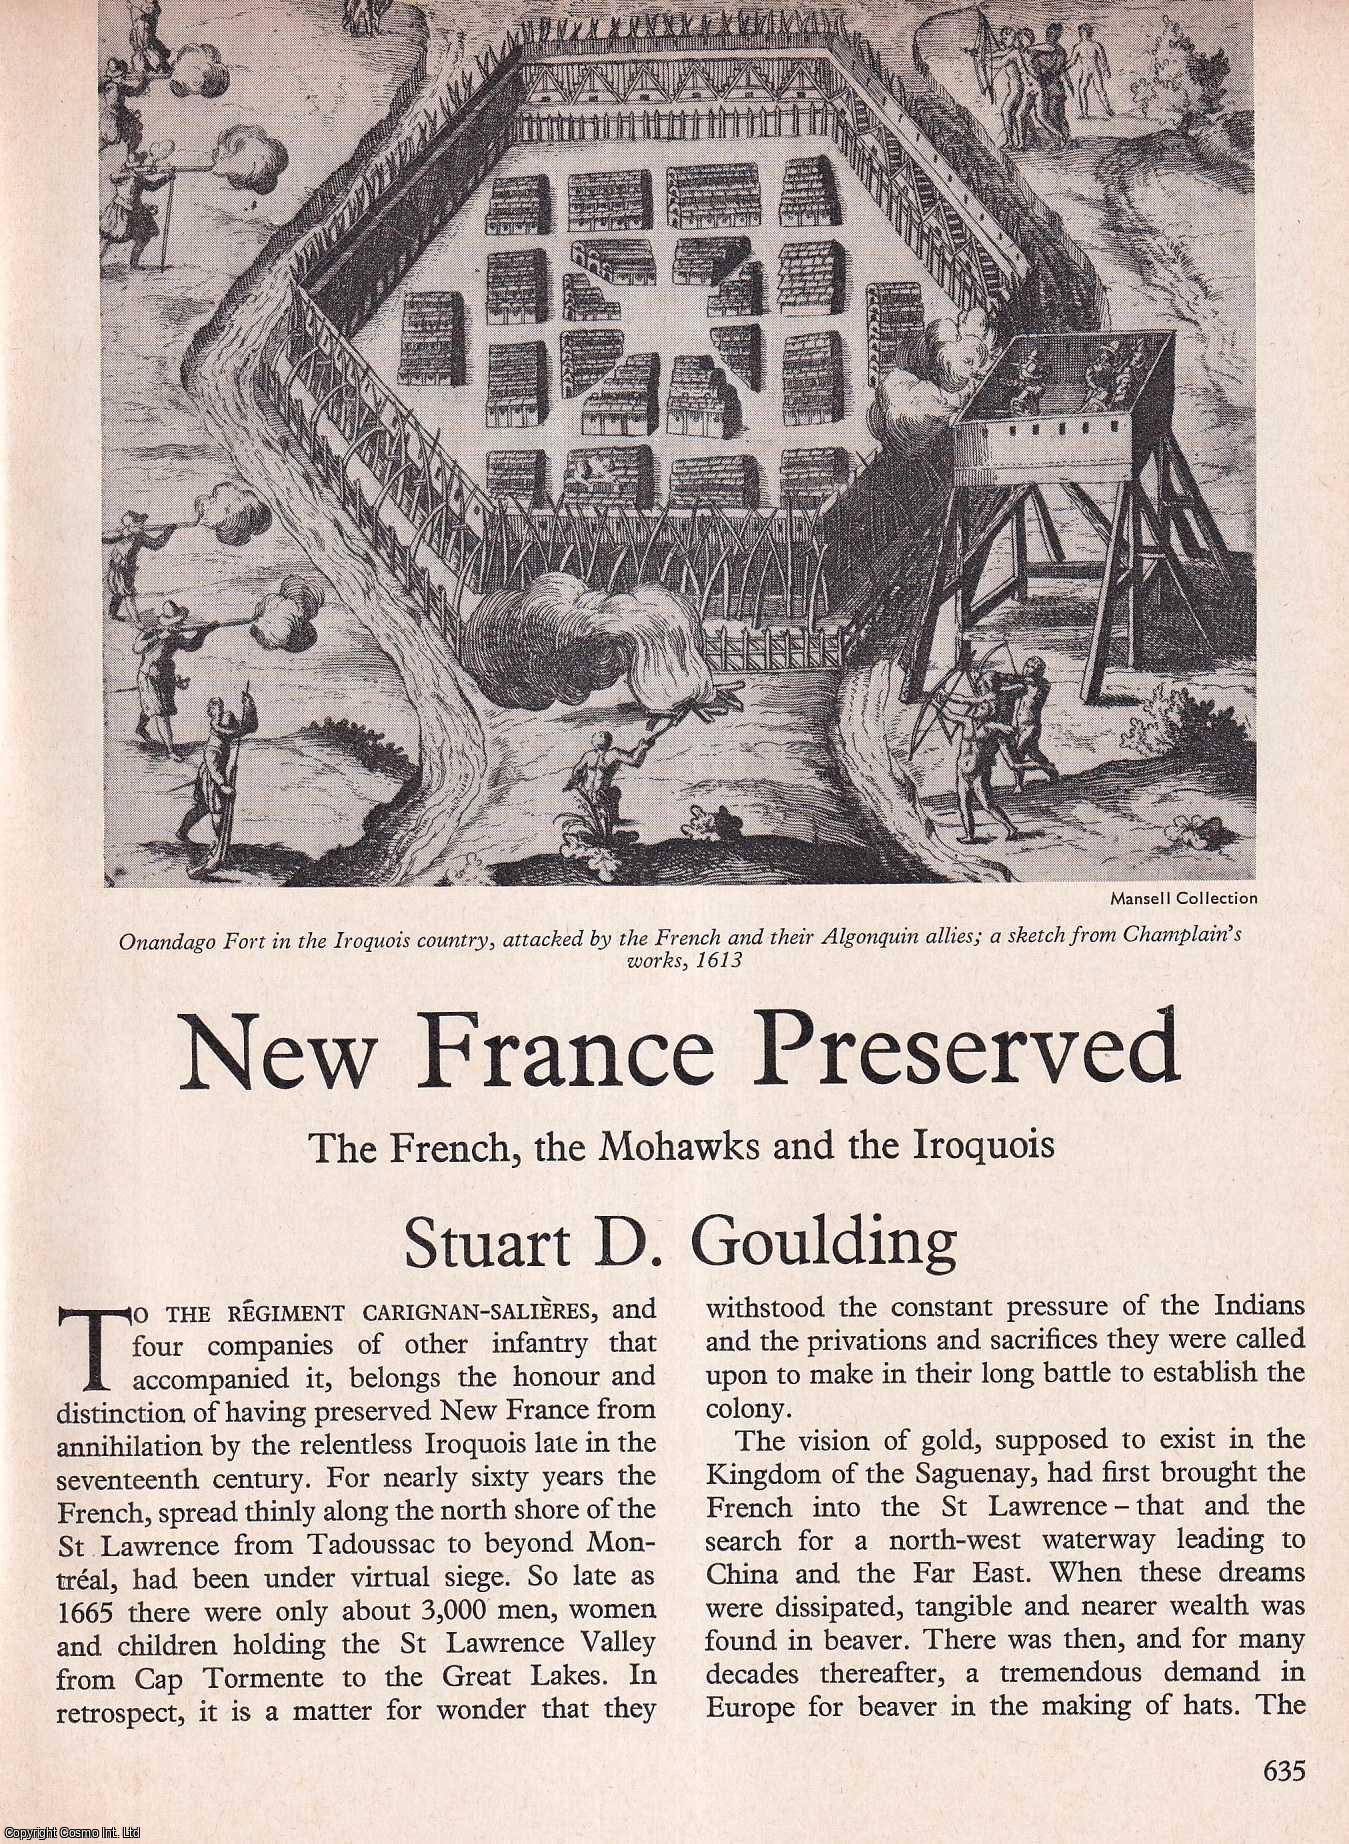 Stuart D. Goulding - New France Preserved: The French, The Mohawks and The Iroquois. An original article from History Today magazine, 1972.